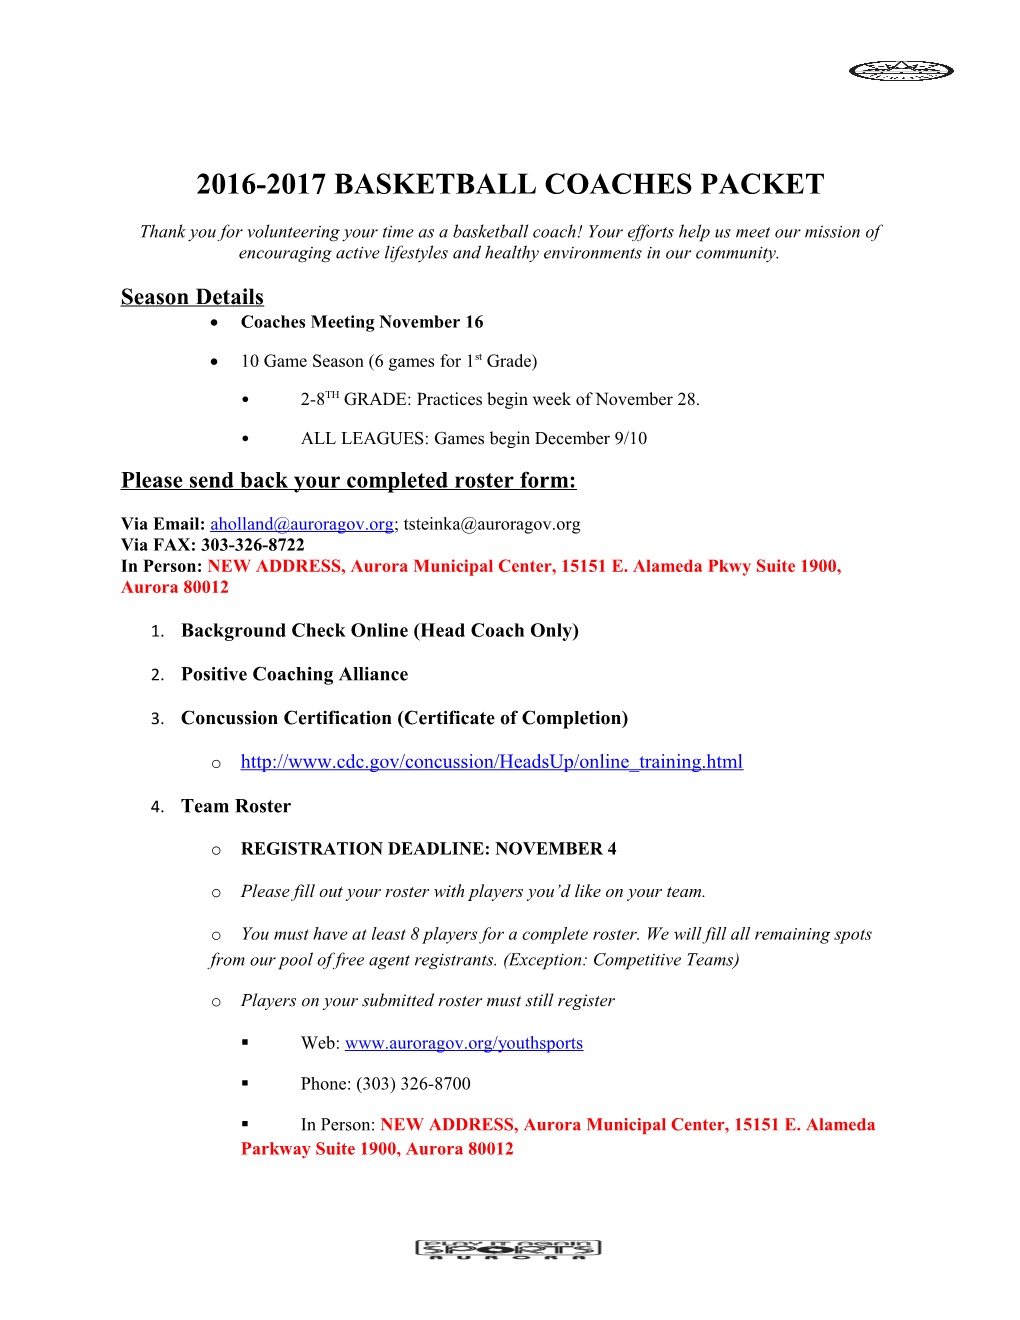 2016-2017 Basketball Coaches Packet